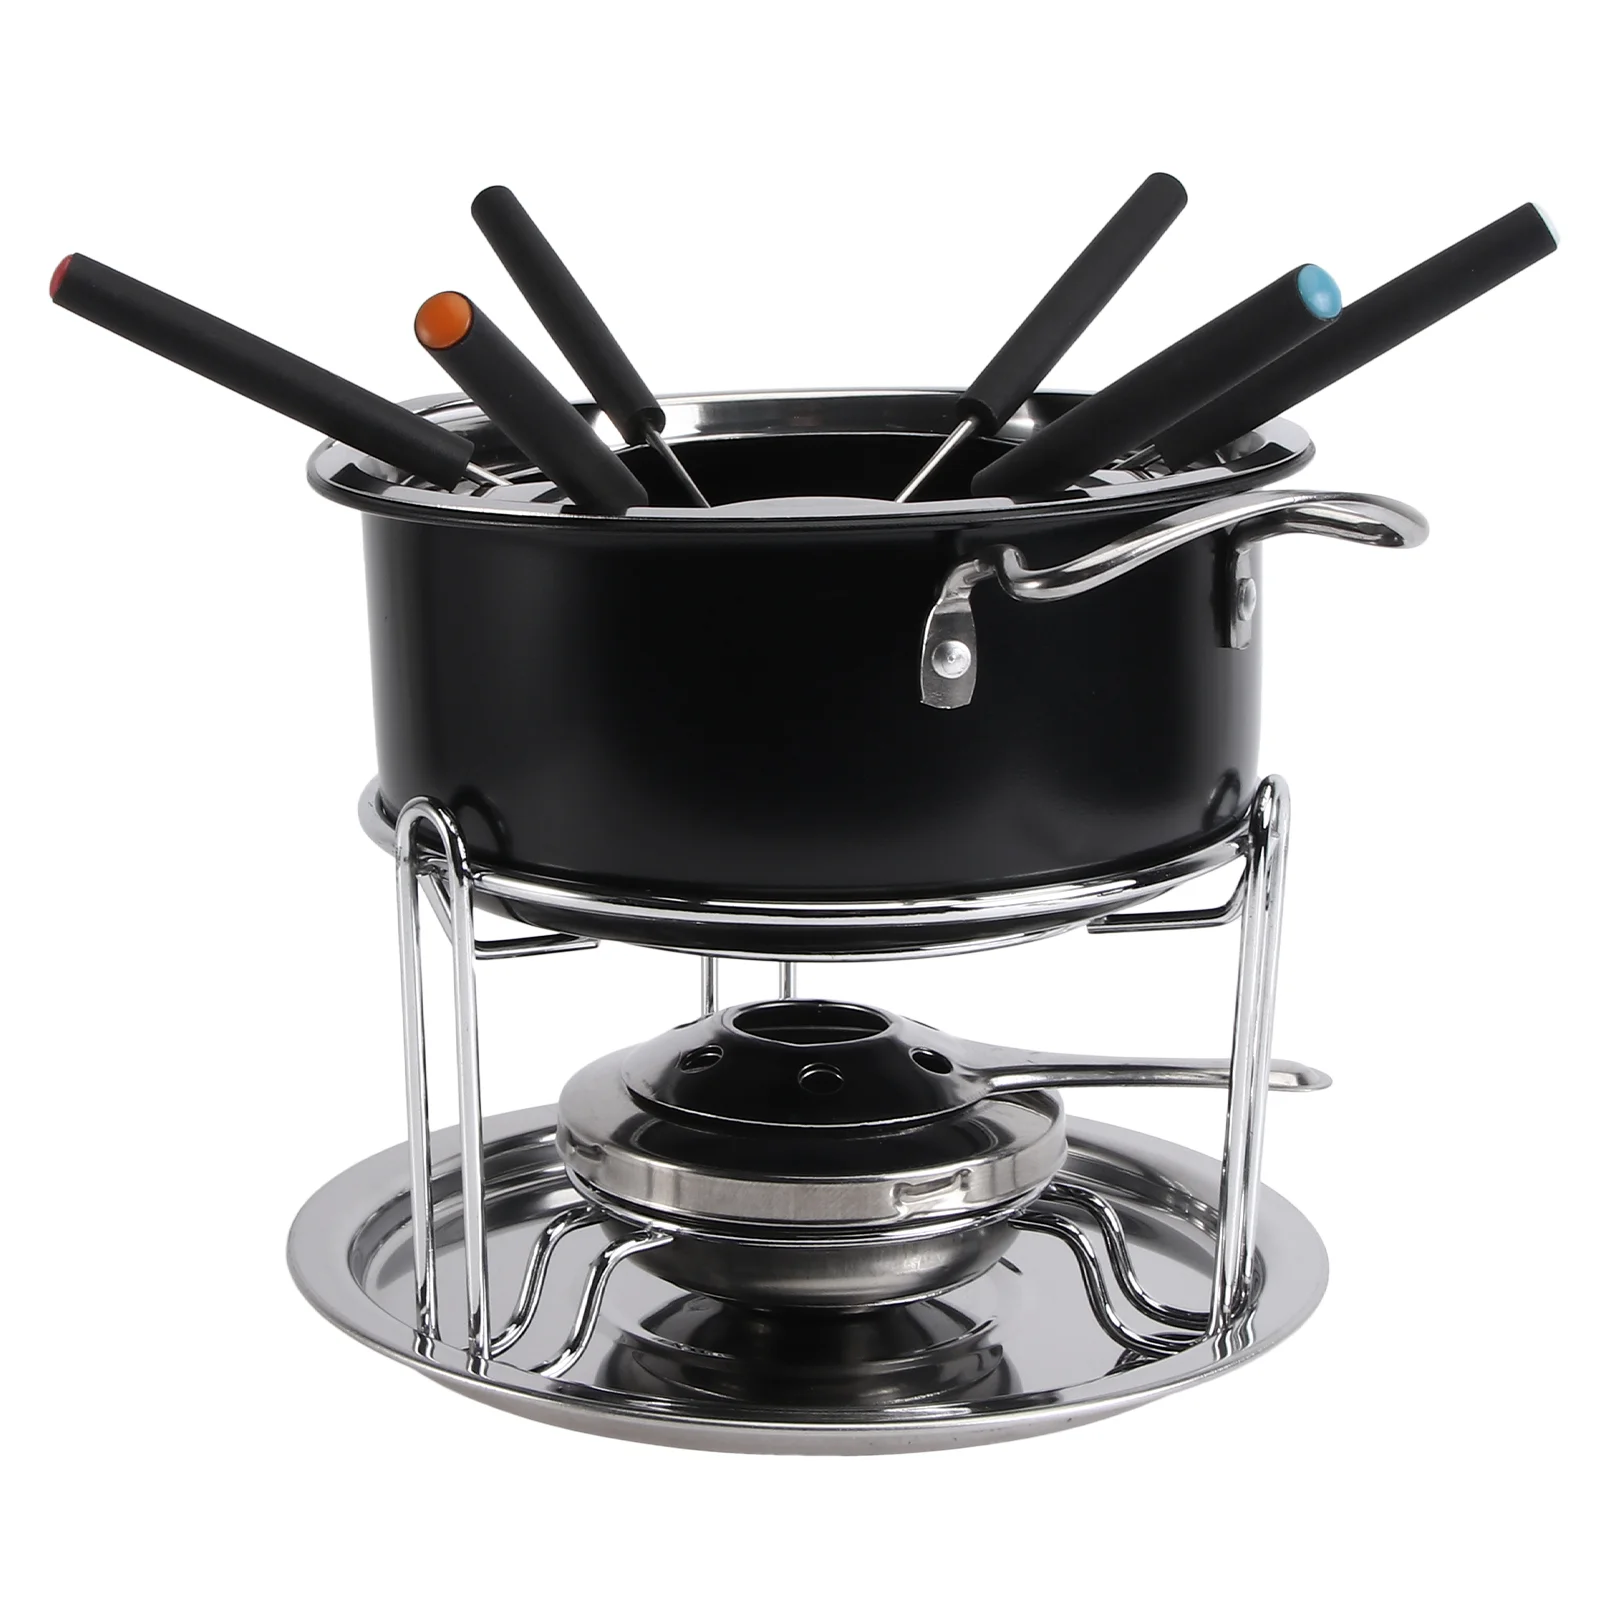 

Fondue Pot Chocolate Melting Cheese Butter Set Warmer Stainless Steel Boiler Pan Persons Double Choco Furnace Heating Electric